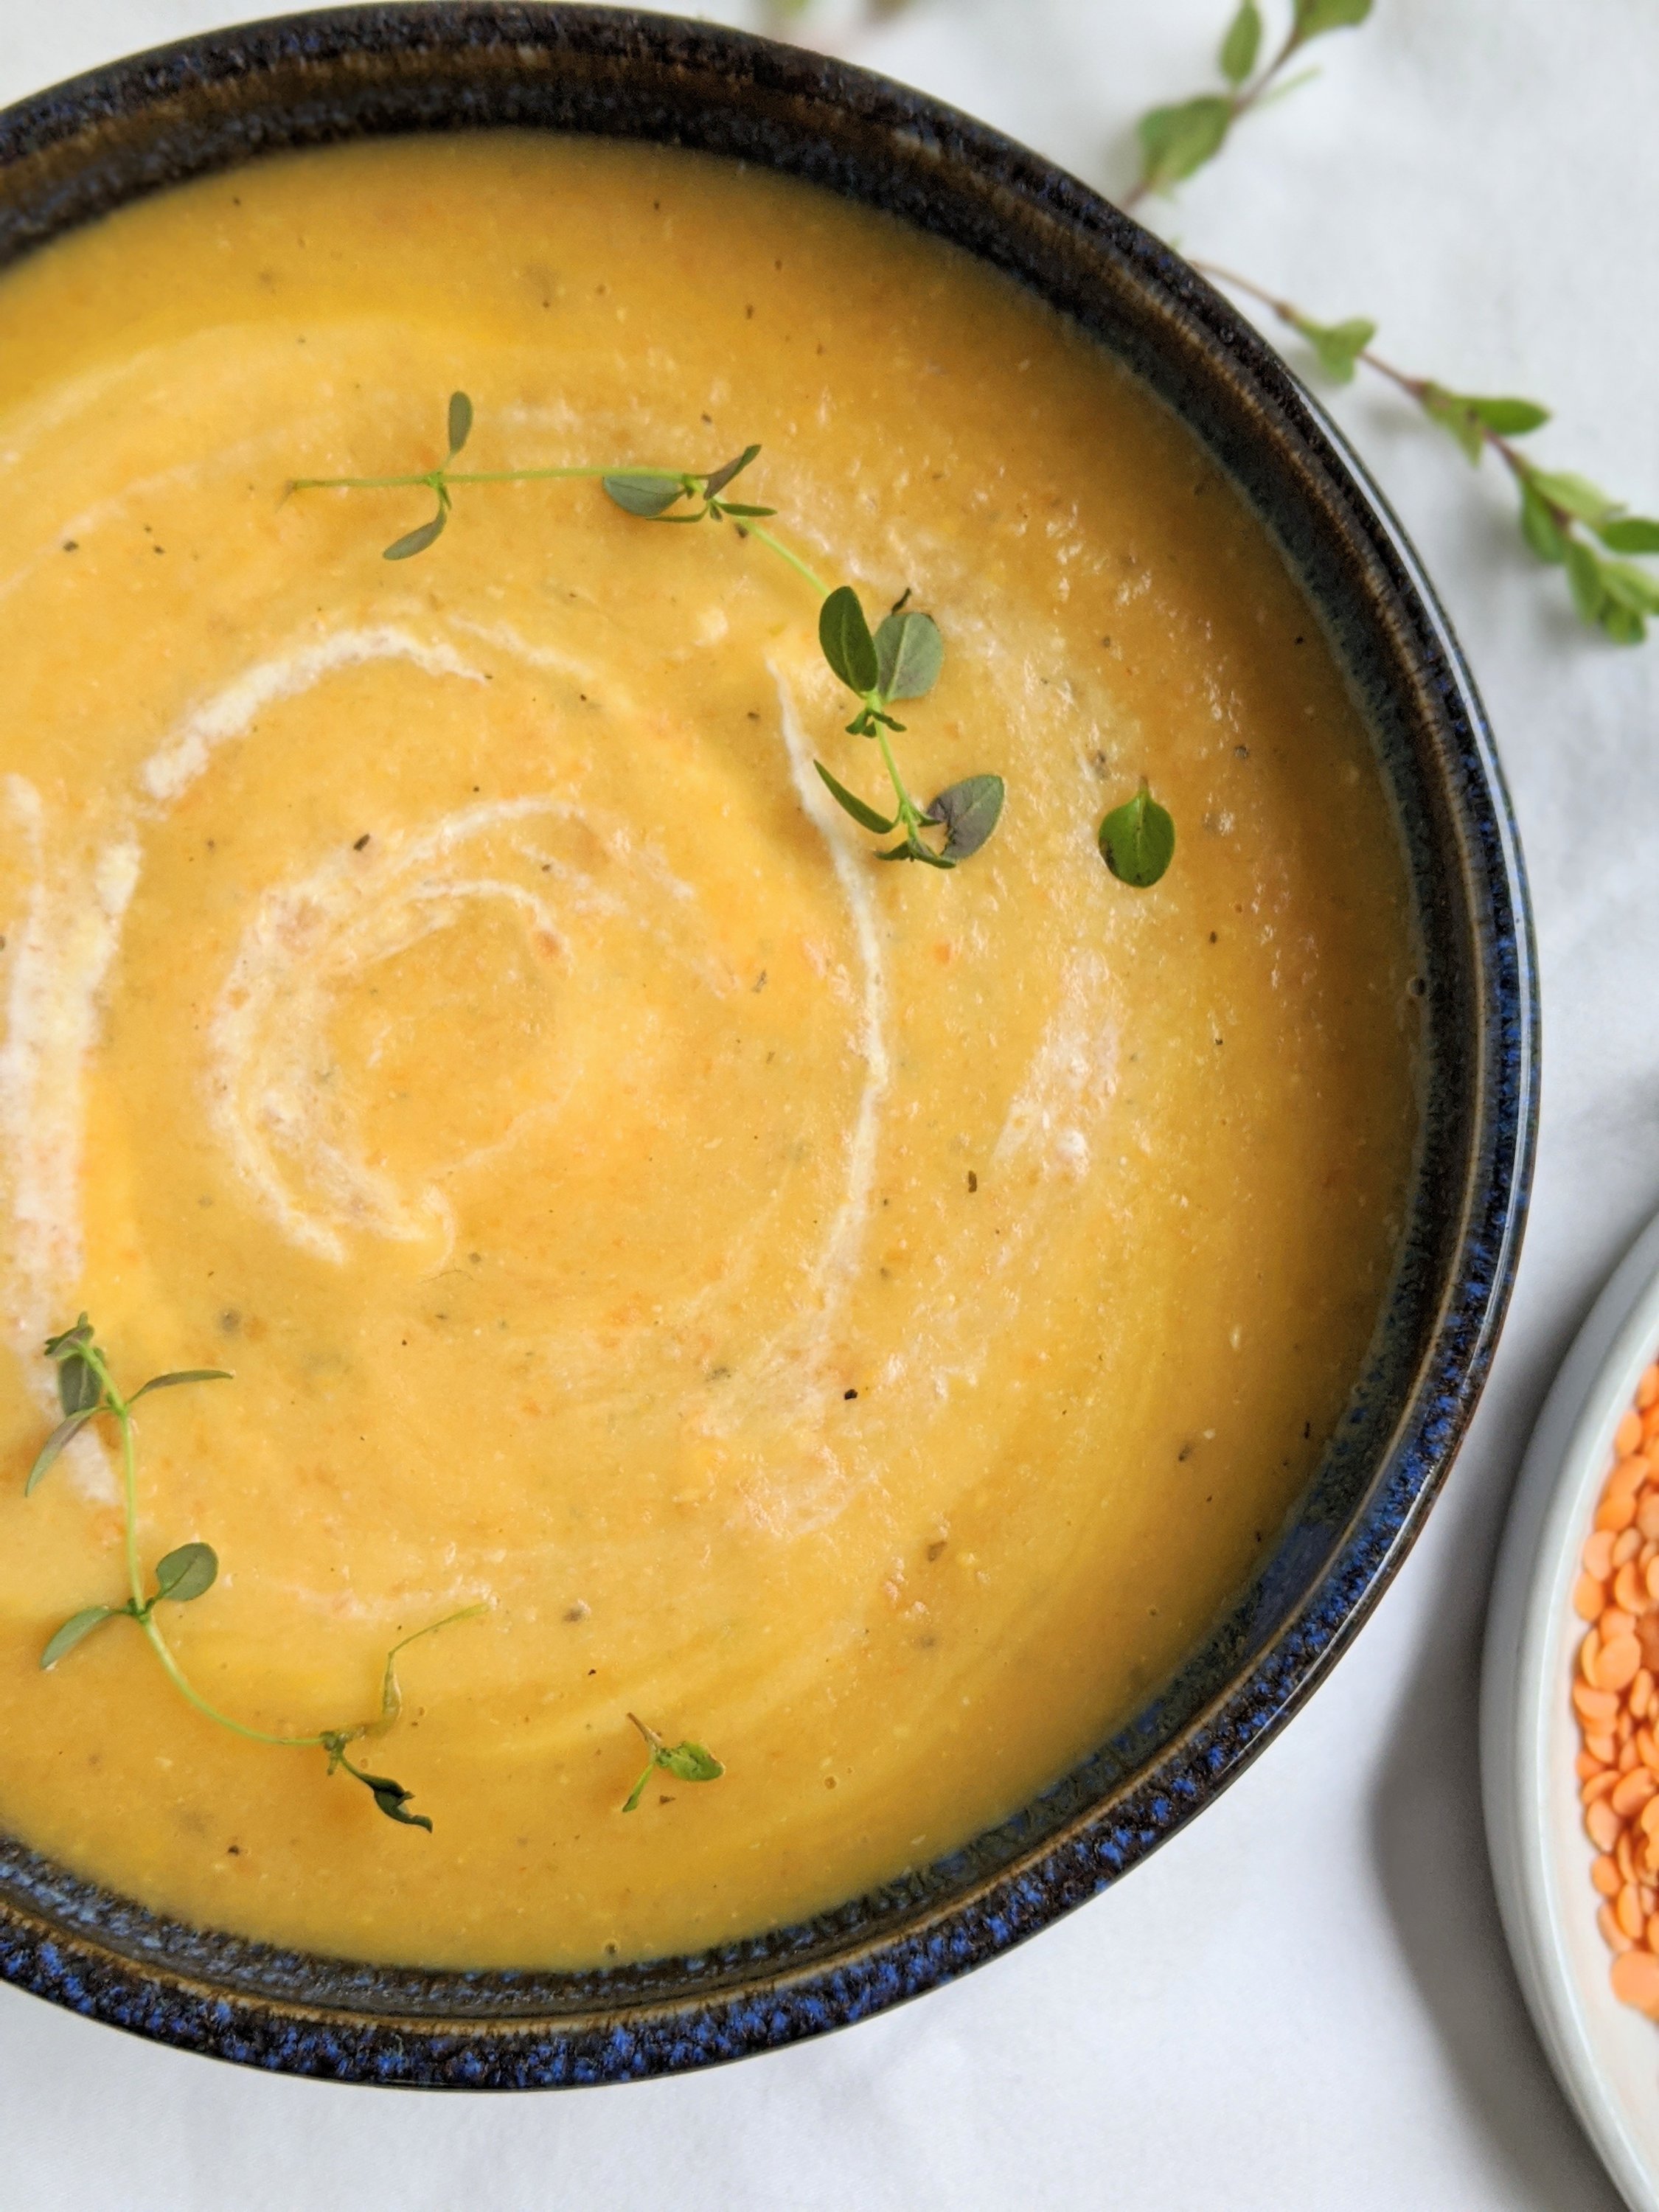 creamy vegan soup recipes healthy no dairy no cream no milk plant based vegetarian veggie soup with lentil and red lentils spices and carrots heathly creamy vegetable soups